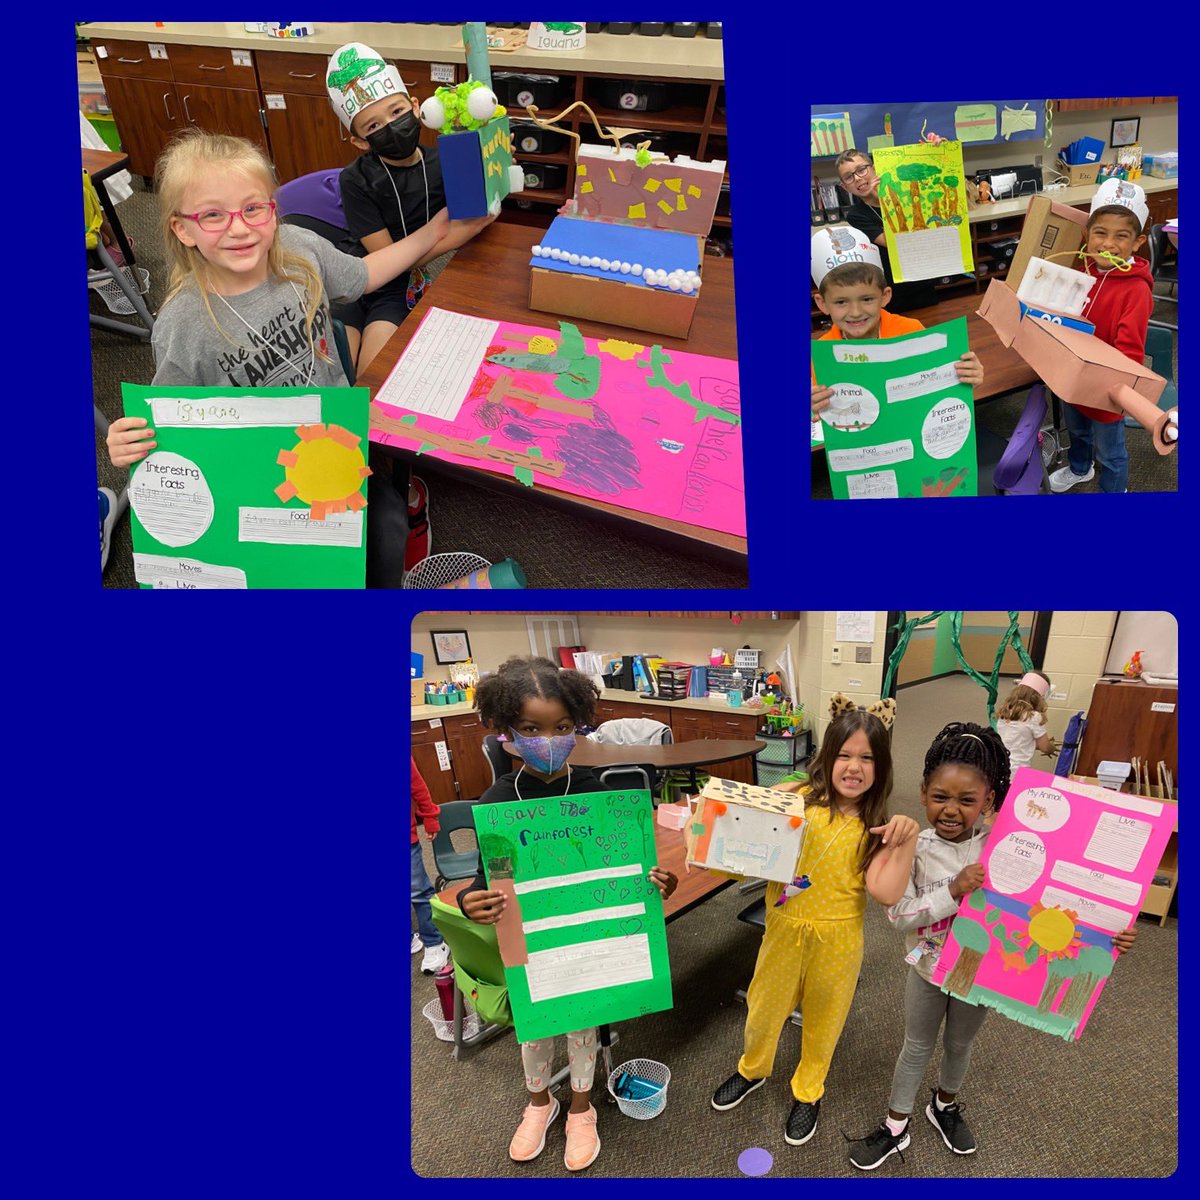 So proud of these babies and their hard work this week. They rocked their projects and presentations. 🥳 #savetherainforests @HumbleISD_LSE #lifeisbetteratlakeshore #leopardspotting